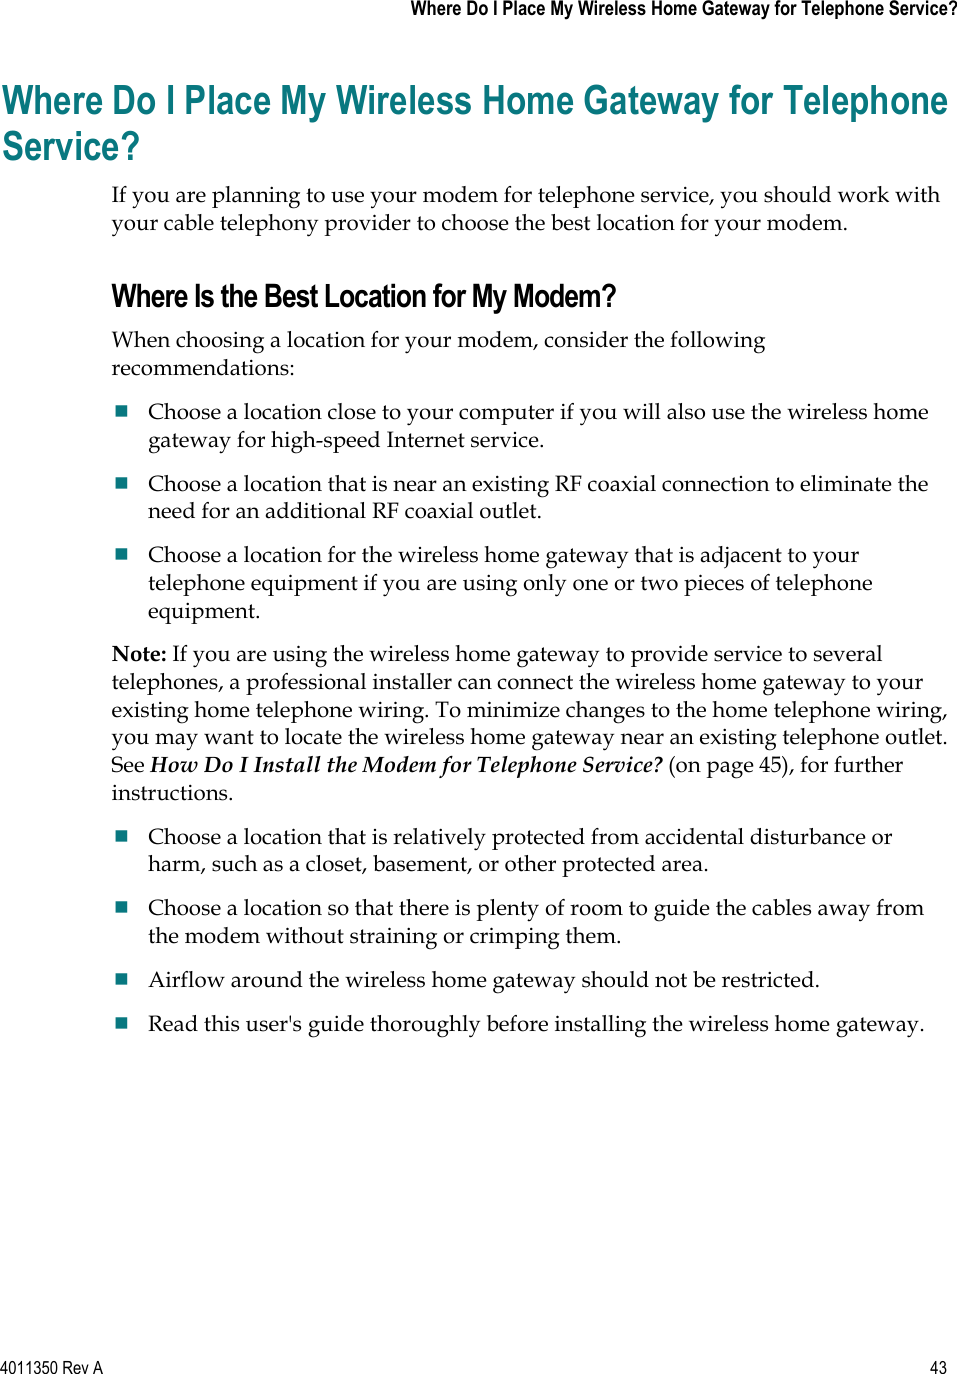 4011350 Rev A    43   Where Do I Place My Wireless Home Gateway for Telephone Service?Where Do I Place My Wireless Home Gateway for Telephone Service?If you are planning to use your modem for telephone service, you should work with your cable telephony provider to choose the best location for your modem. Where Is the Best Location for My Modem? When choosing a location for your modem, consider the following recommendations:Choose a location close to your computer if you will also use the wireless home gateway for high-speed Internet service. Choose a location that is near an existing RF coaxial connection to eliminate the need for an additional RF coaxial outlet. Choose a location for the wireless home gateway that is adjacent to your telephone equipment if you are using only one or two pieces of telephone equipment.Note: If you are using the wireless home gateway to provide service to several telephones, a professional installer can connect the wireless home gateway to your existing home telephone wiring. To minimize changes to the home telephone wiring, you may want to locate the wireless home gateway near an existing telephone outlet. See How Do I Install the Modem for Telephone Service? (on page 45), for further instructions.Choose a location that is relatively protected from accidental disturbance or harm, such as a closet, basement, or other protected area. Choose a location so that there is plenty of room to guide the cables away from the modem without straining or crimping them. Airflow around the wireless home gateway should not be restricted. Read this user&apos;s guide thoroughly before installing the wireless home gateway. 